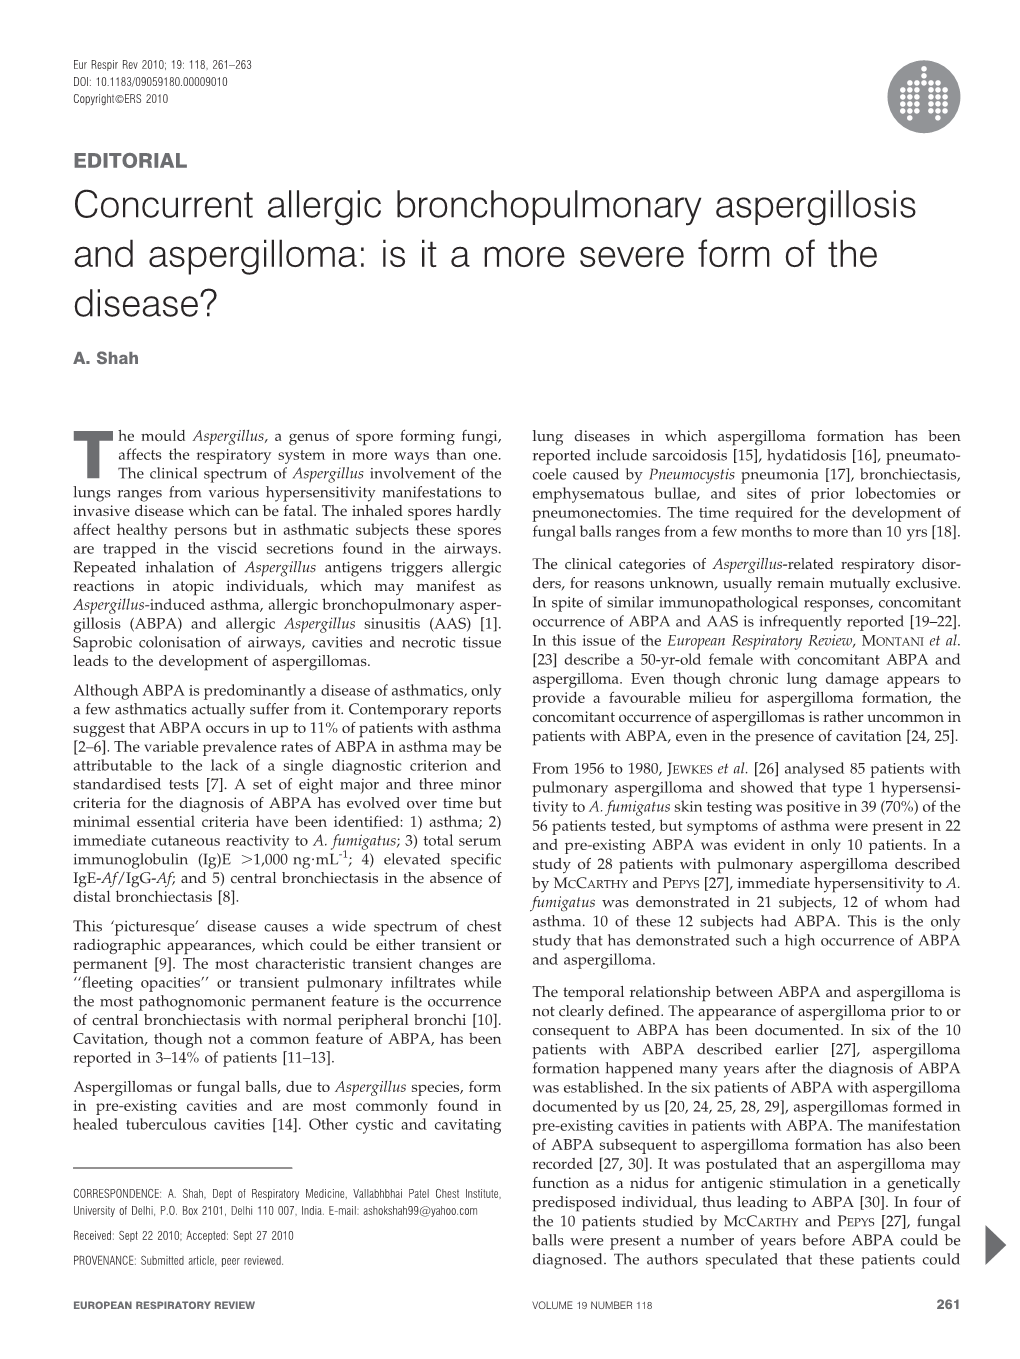 Concurrent Allergic Bronchopulmonary Aspergillosis and Aspergilloma: Is It a More Severe Form of the Disease?